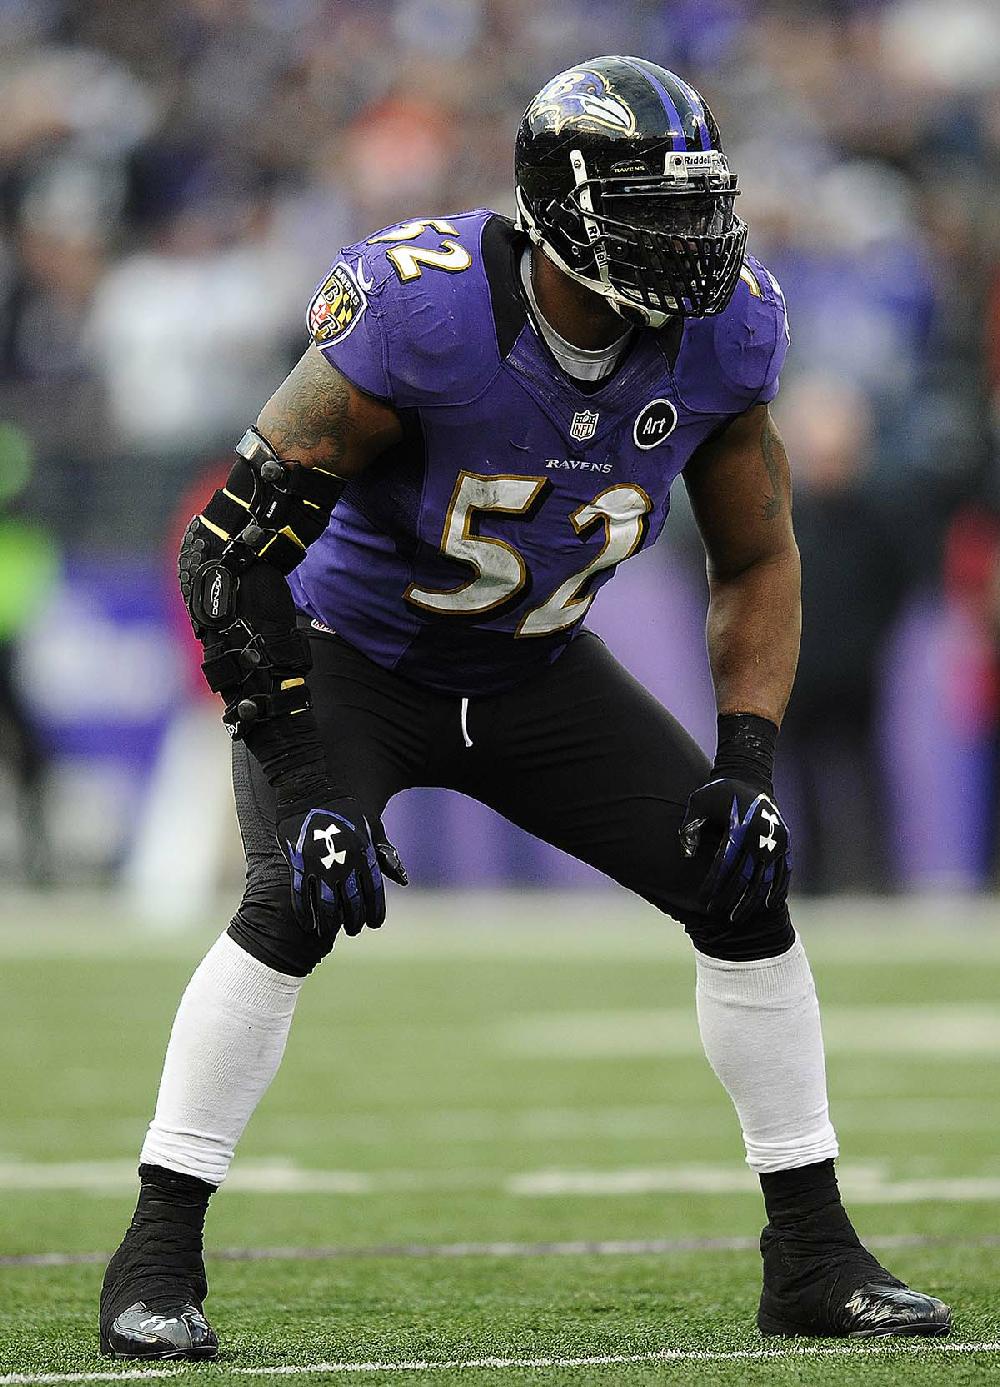 Ragin' Ray leading way for Ravens